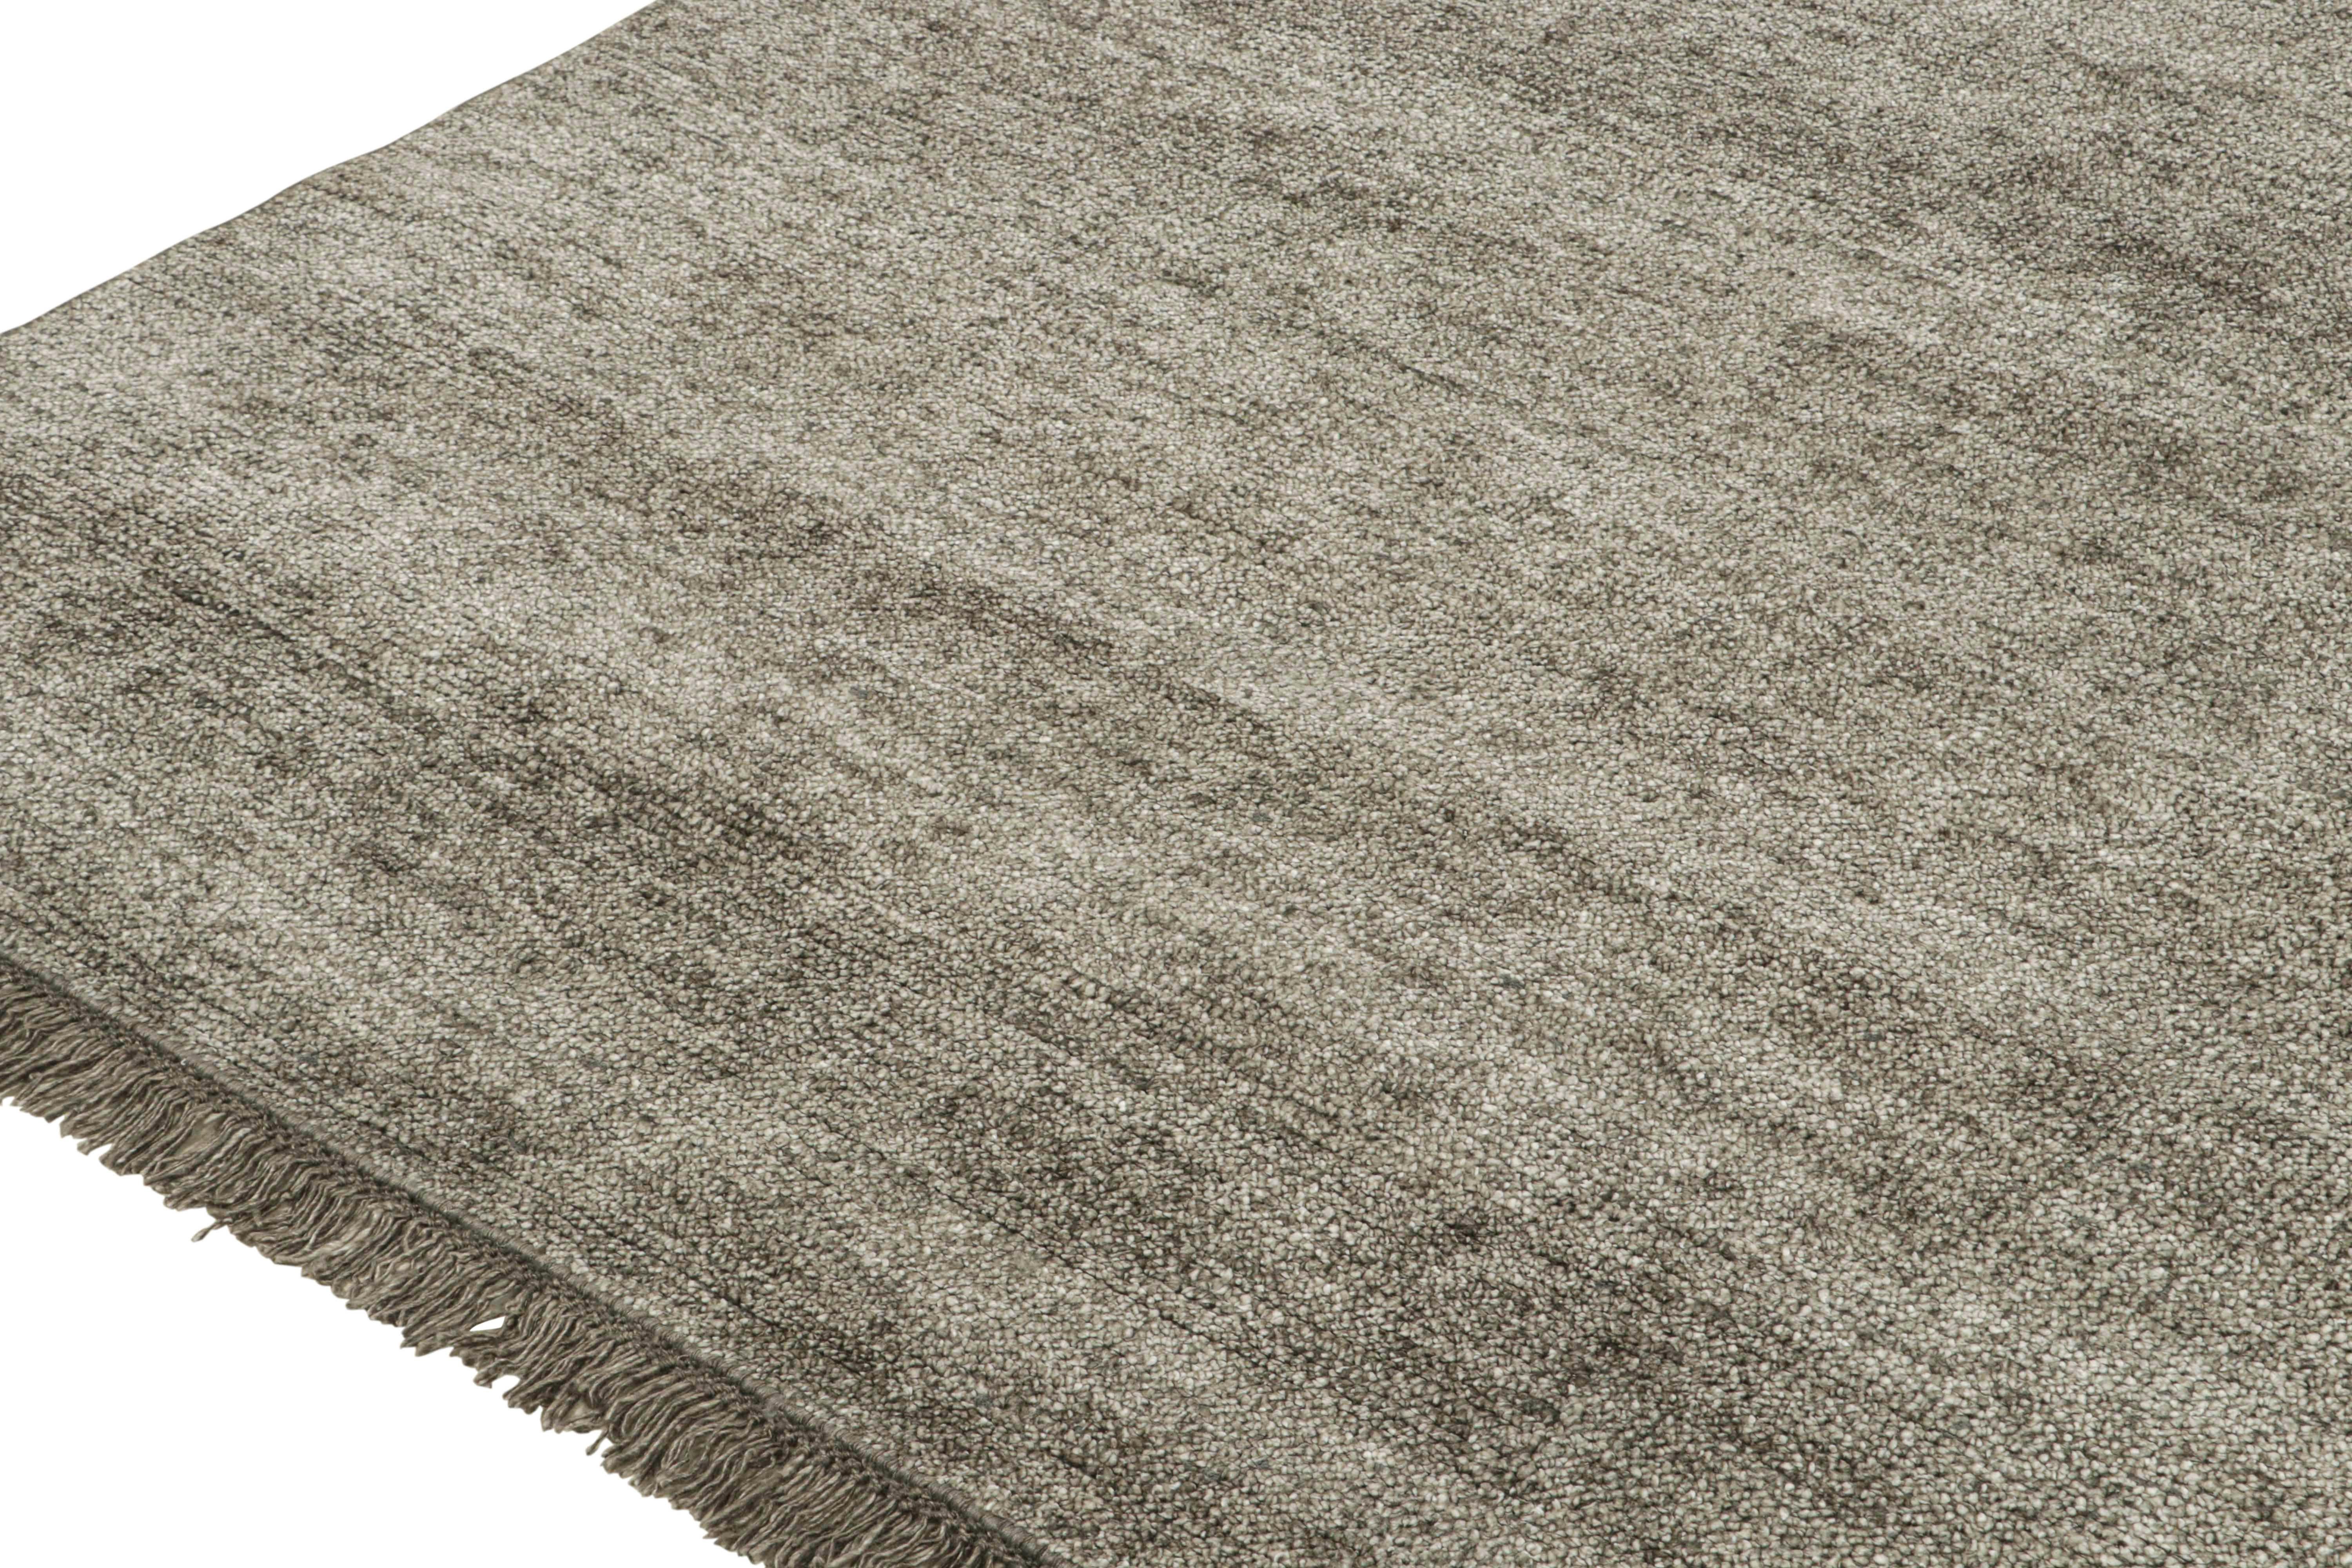 Rug & Kilim’s Modern Rug in Solid Silver-Grey Tone-on-tone Striae In New Condition For Sale In Long Island City, NY